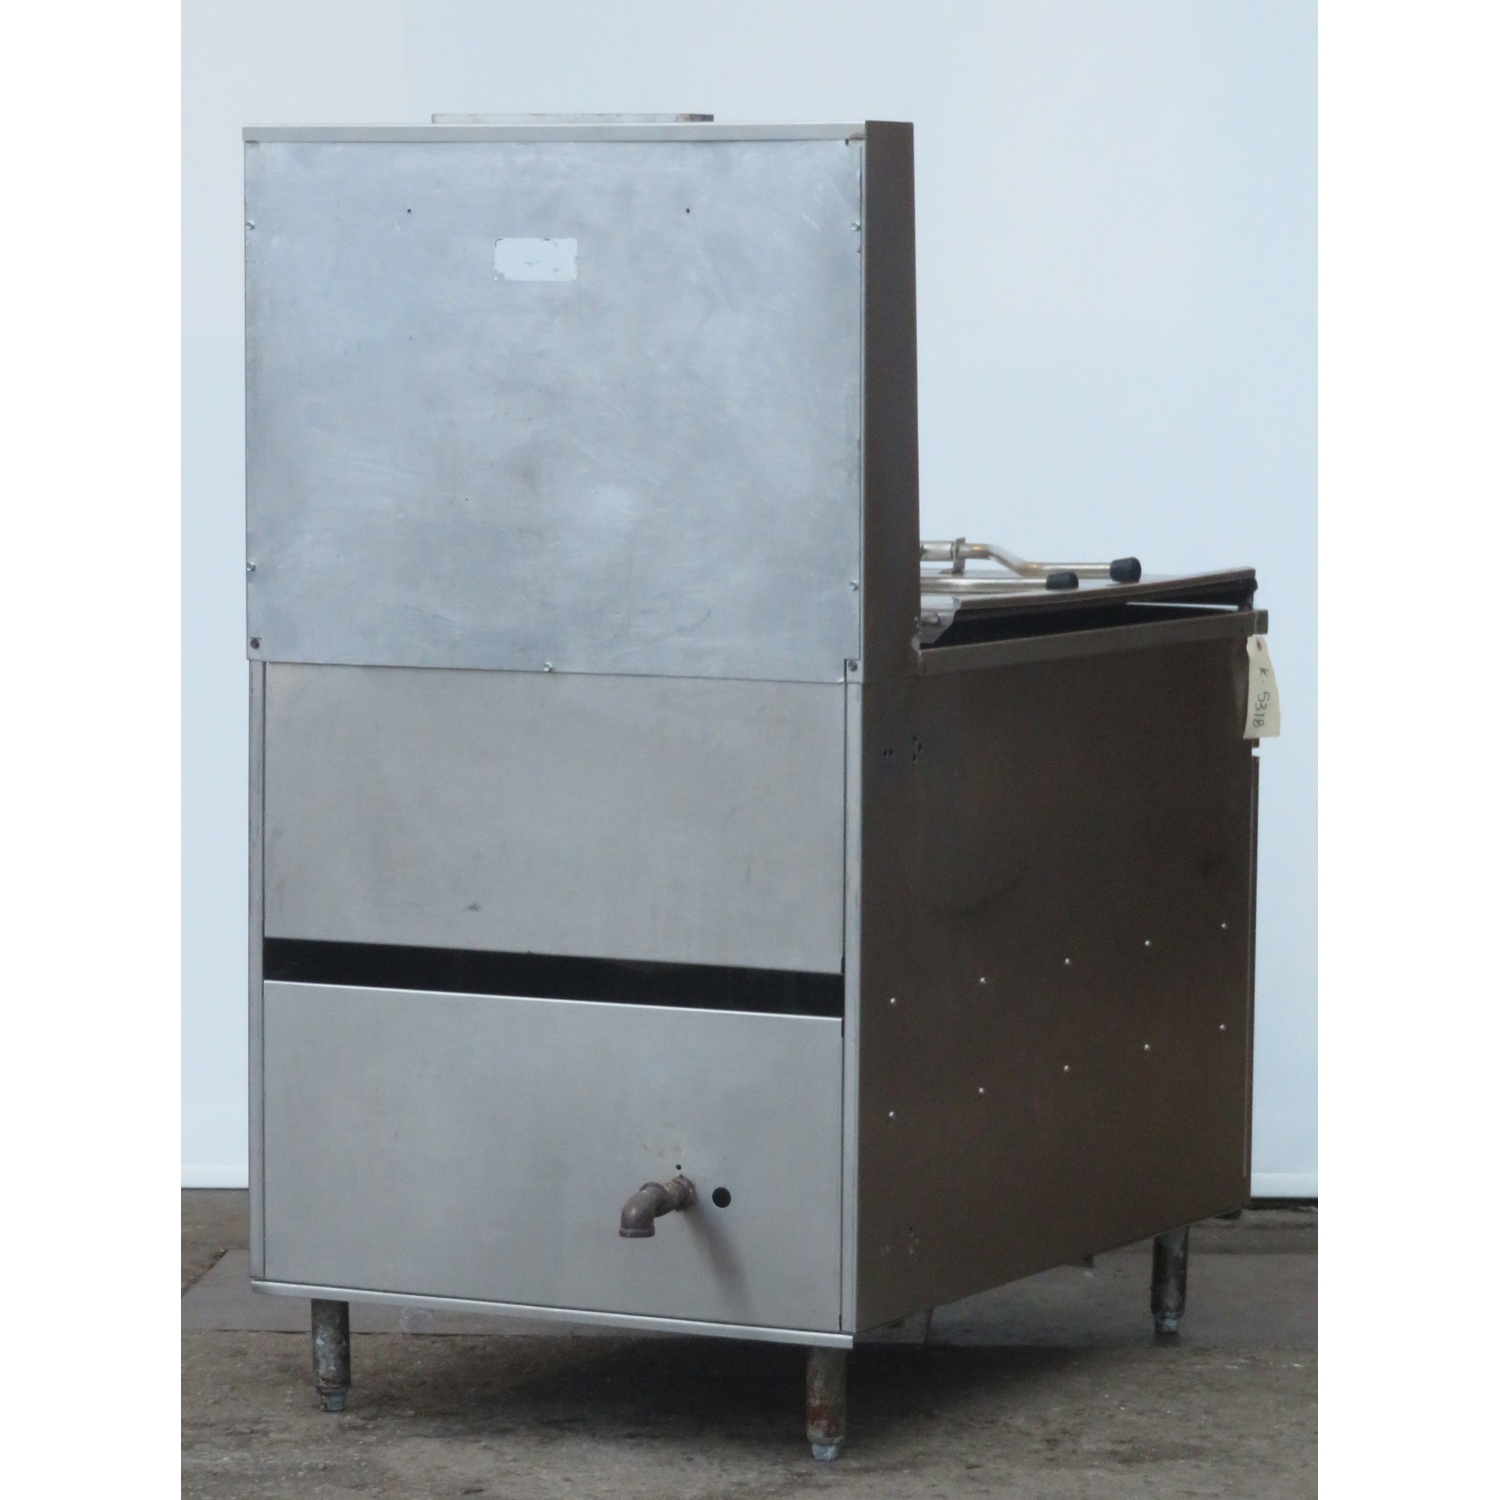 Pitco 24PSS Donut Fryer, Used Great Condition image 6